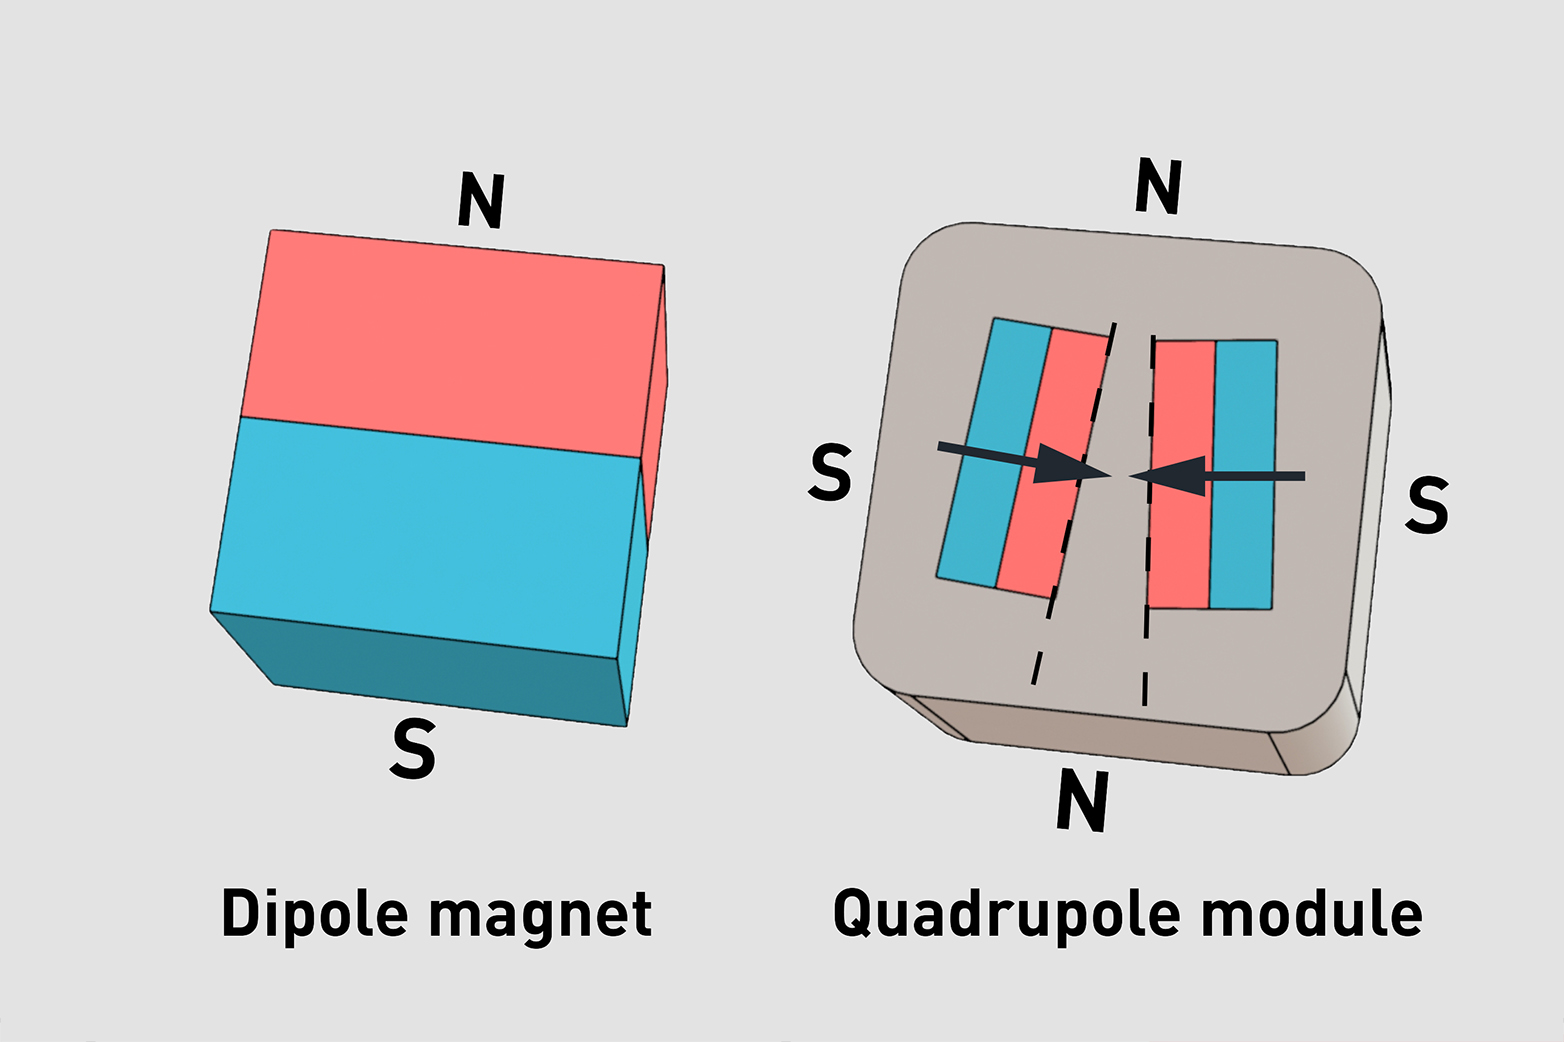 Dipole magnet and quadrupole module in diagram form